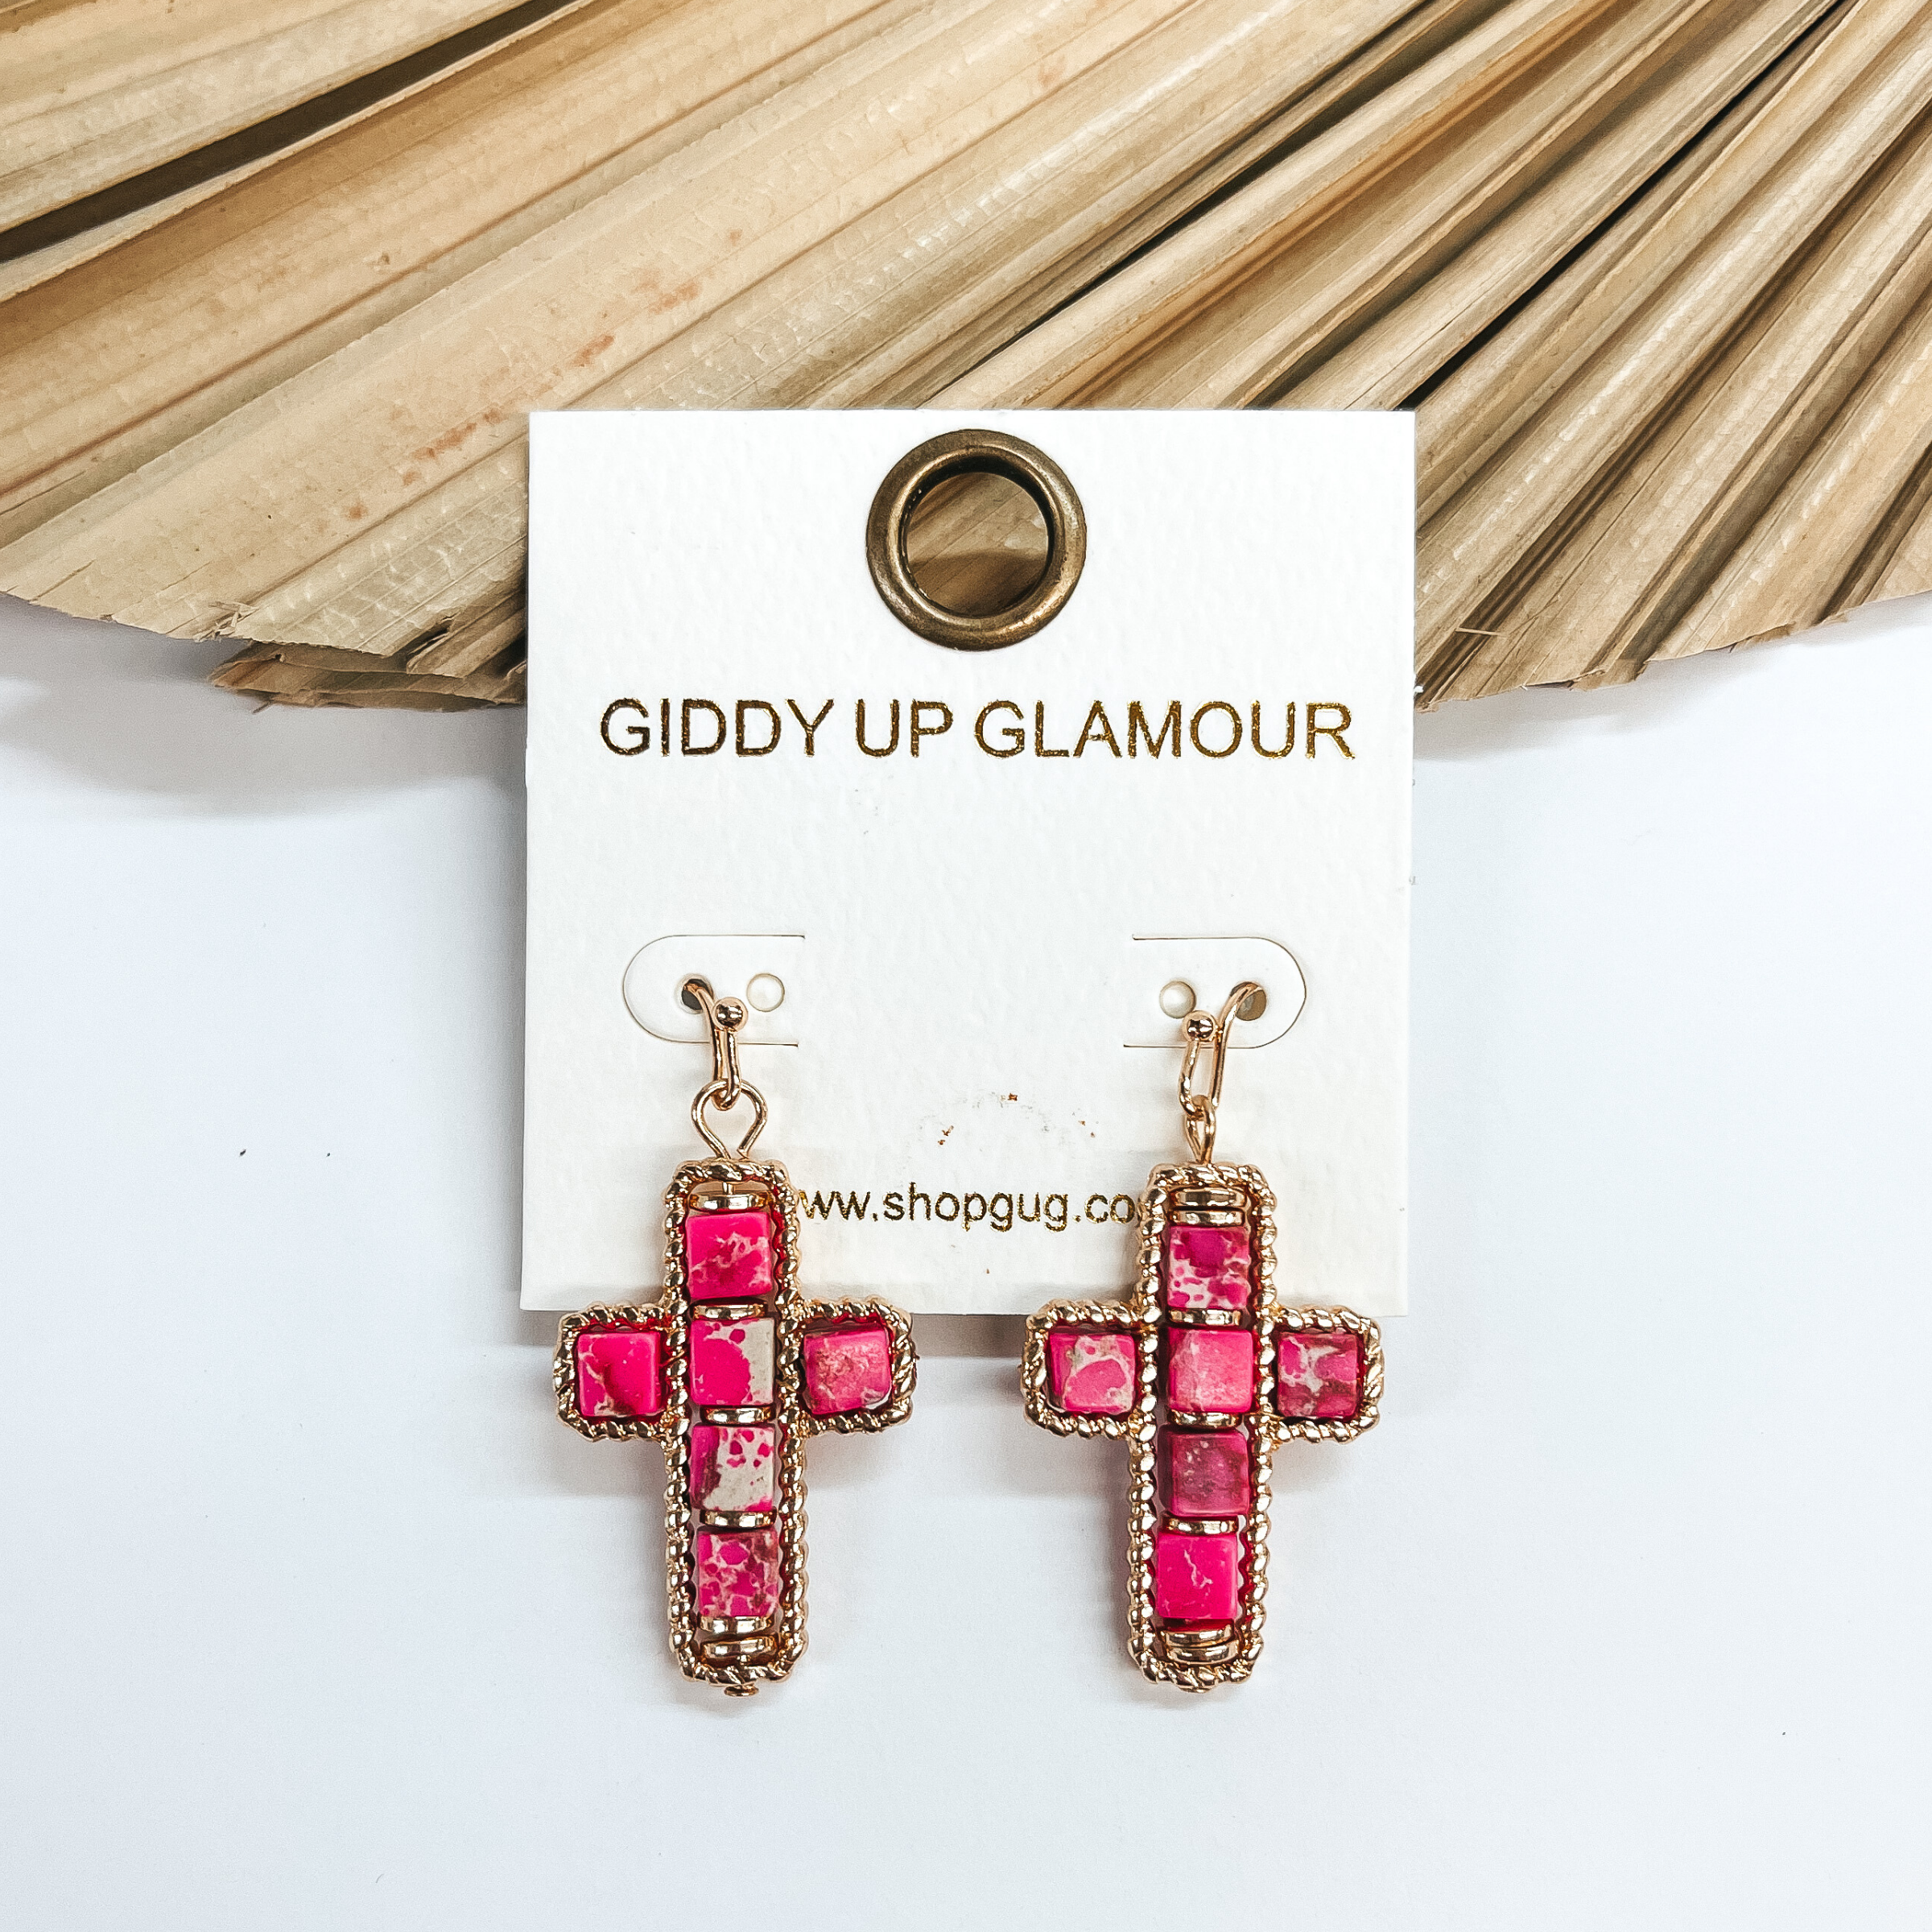 Gold Cross Pendant Earrings with Semi-Precious Stones in Fuchsia Pink - Giddy Up Glamour Boutique